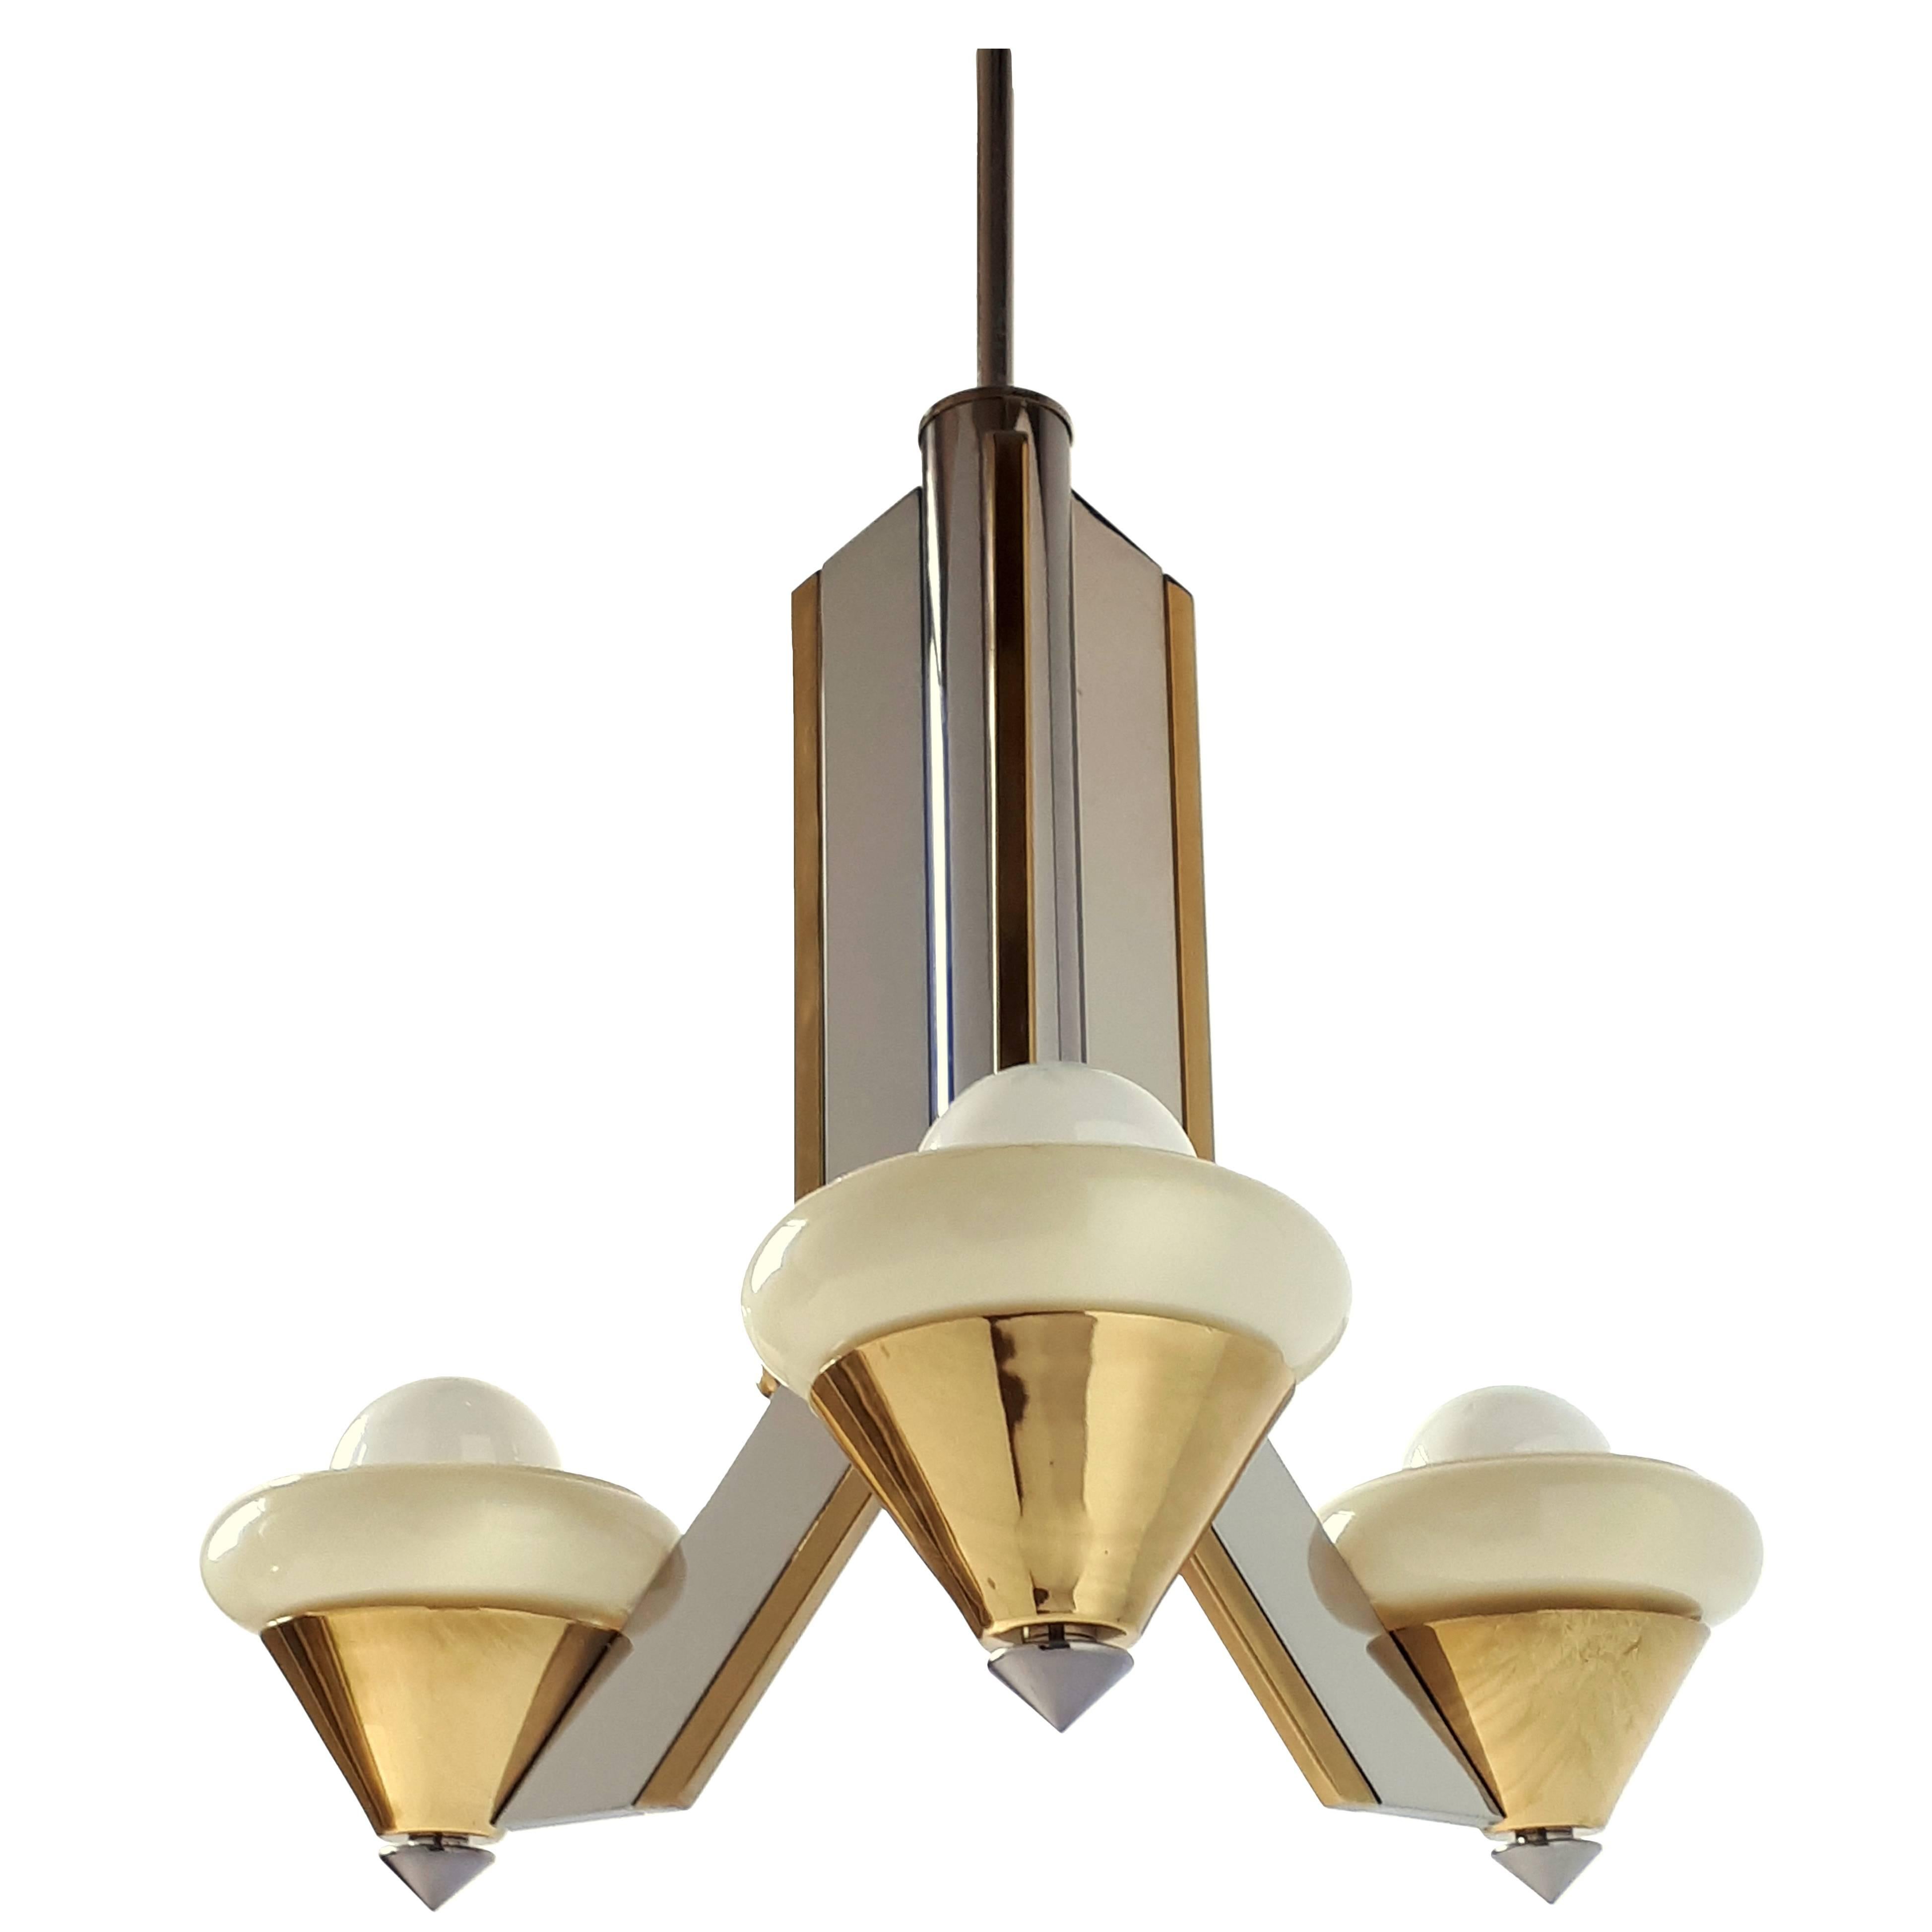 Modern Art Deco Style Chandelier in the Manners of Sciolari, 1970s, Italy